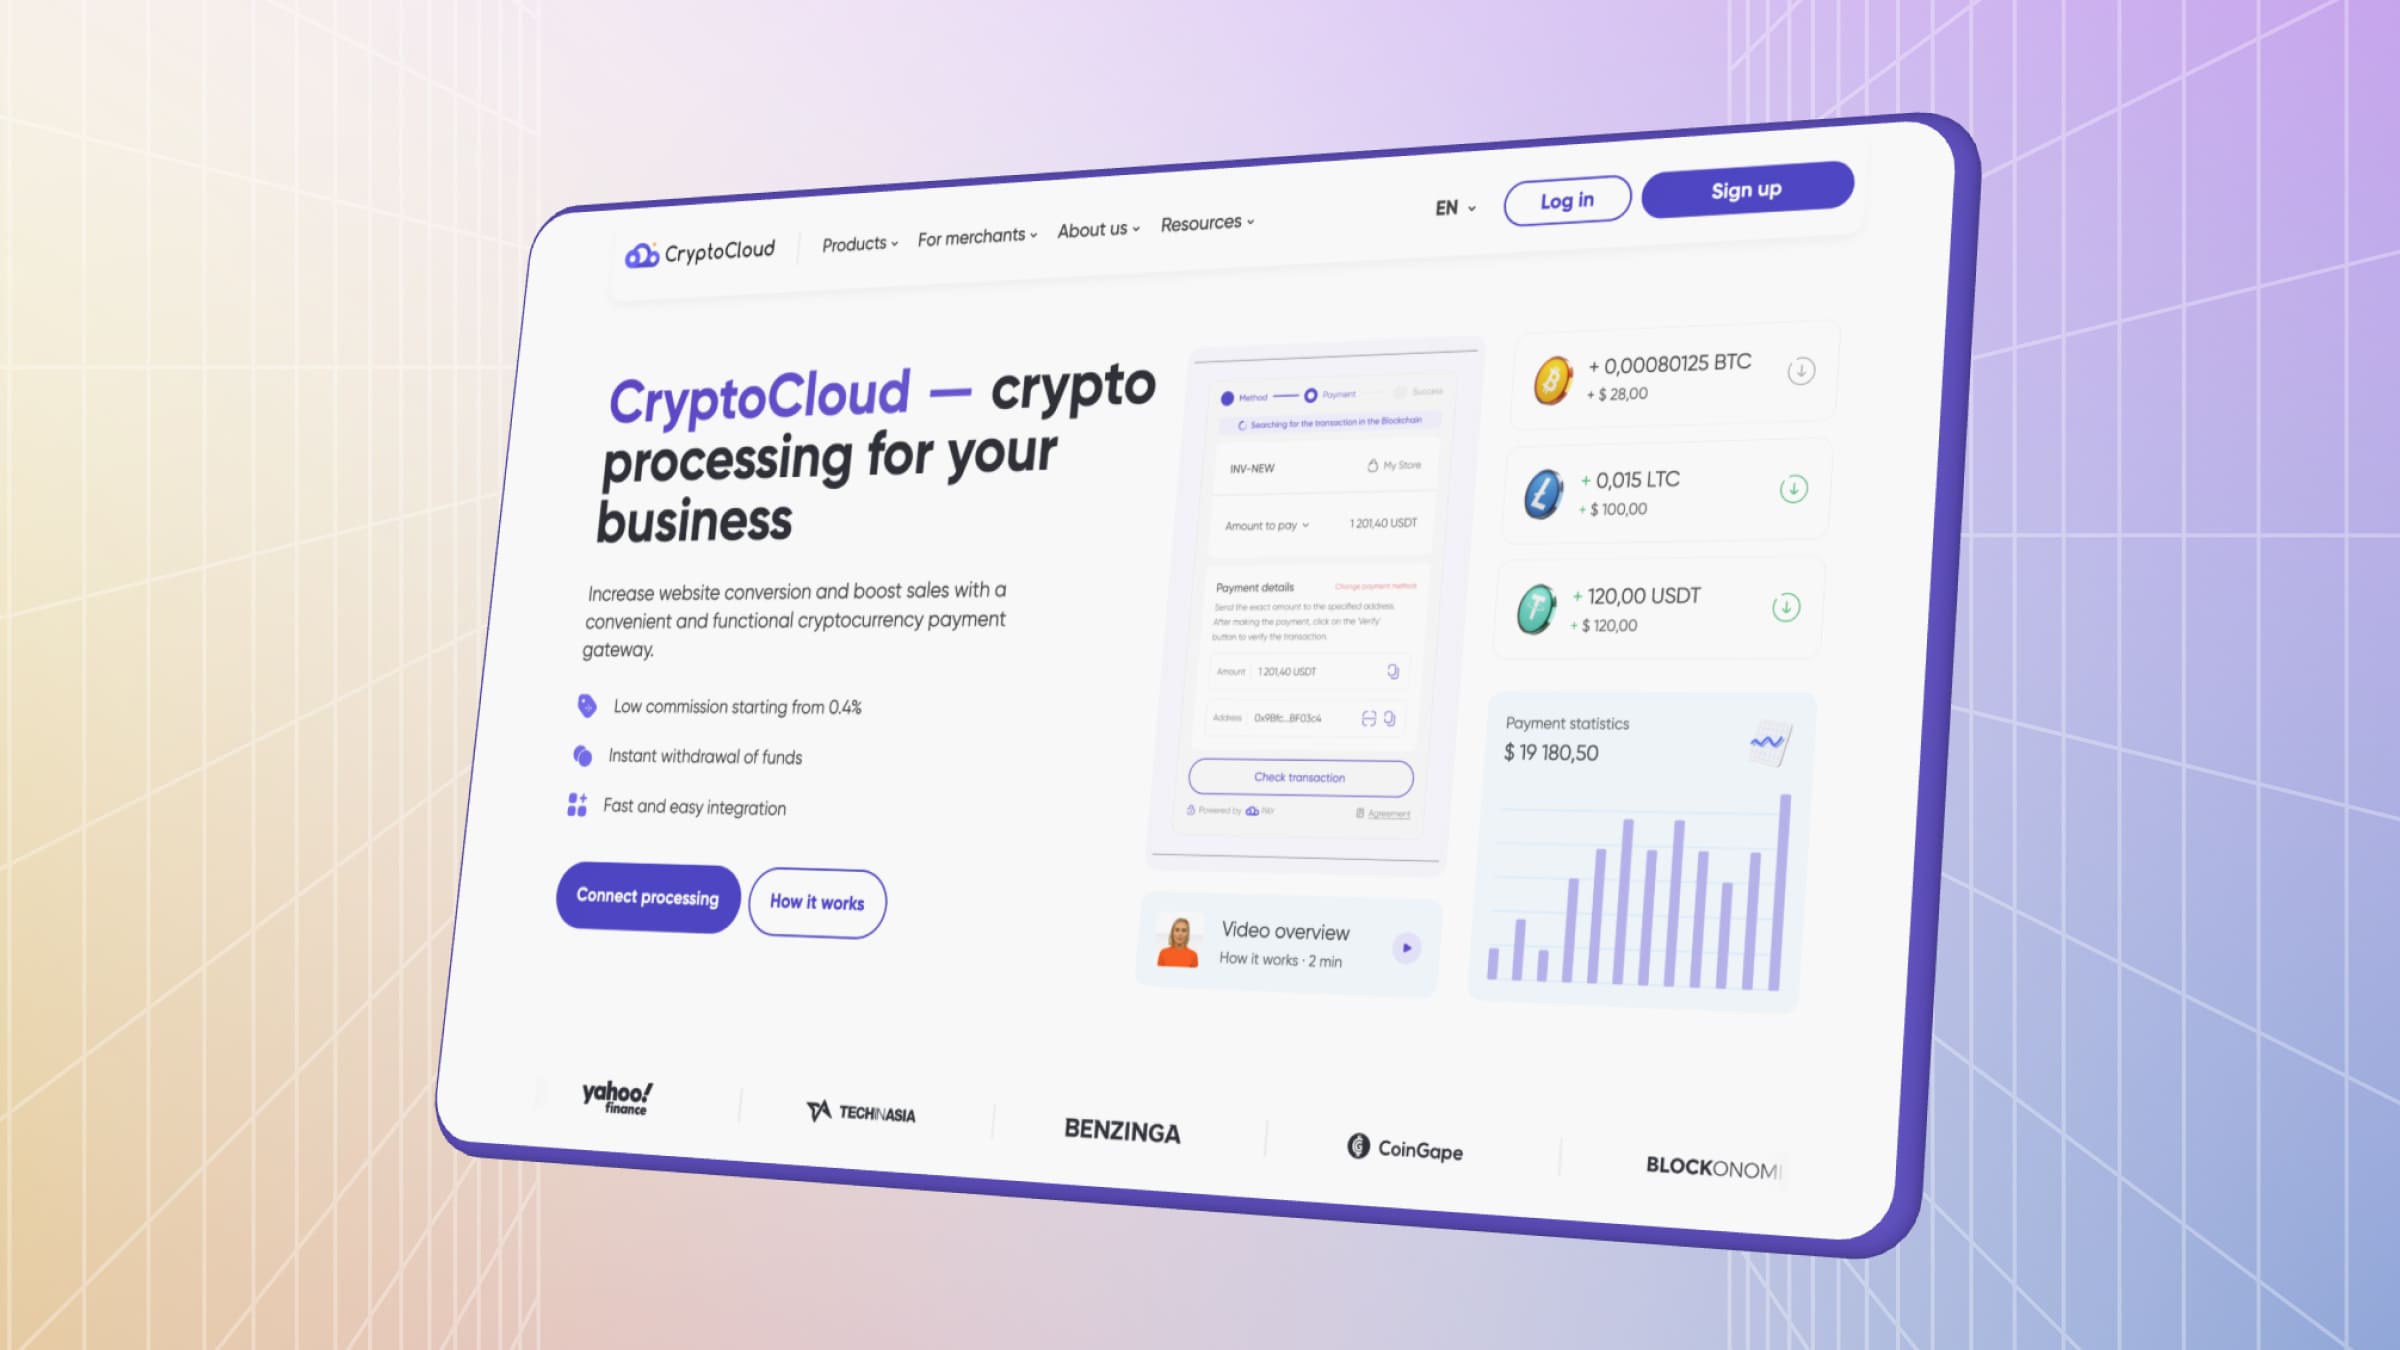 Integrating CryptoCloud's crypto processing into a website can increase sales conversion rates.